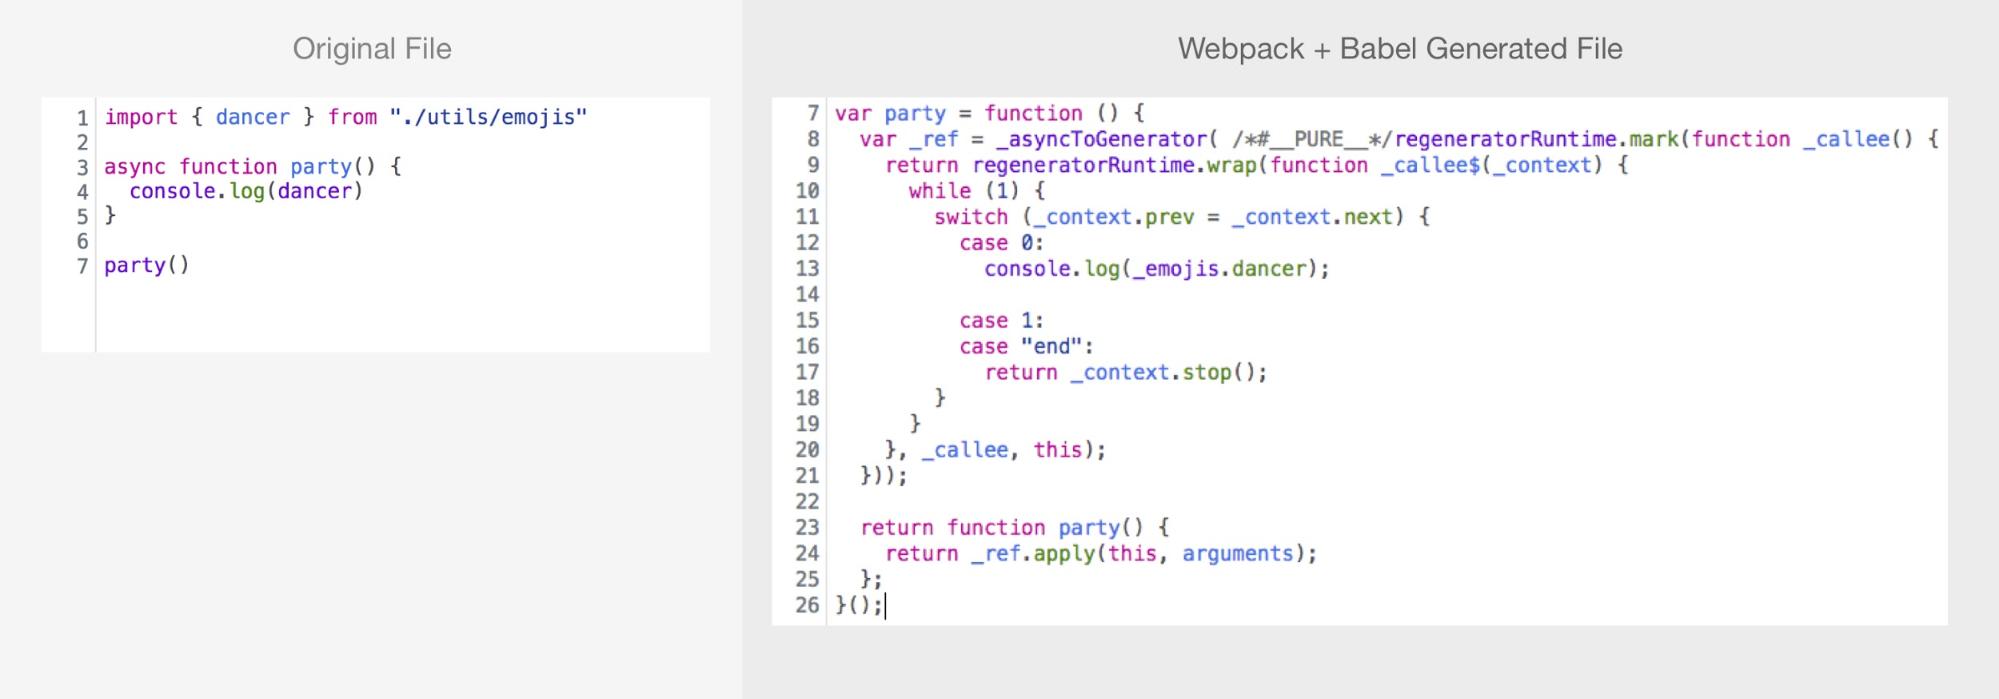 In the example below, we use Webpack and Babel to compile ES Modules and async functions into vanilla JS. The original code on the left is pretty simple. The generated, browser-compatible code on the right is much more complicated.